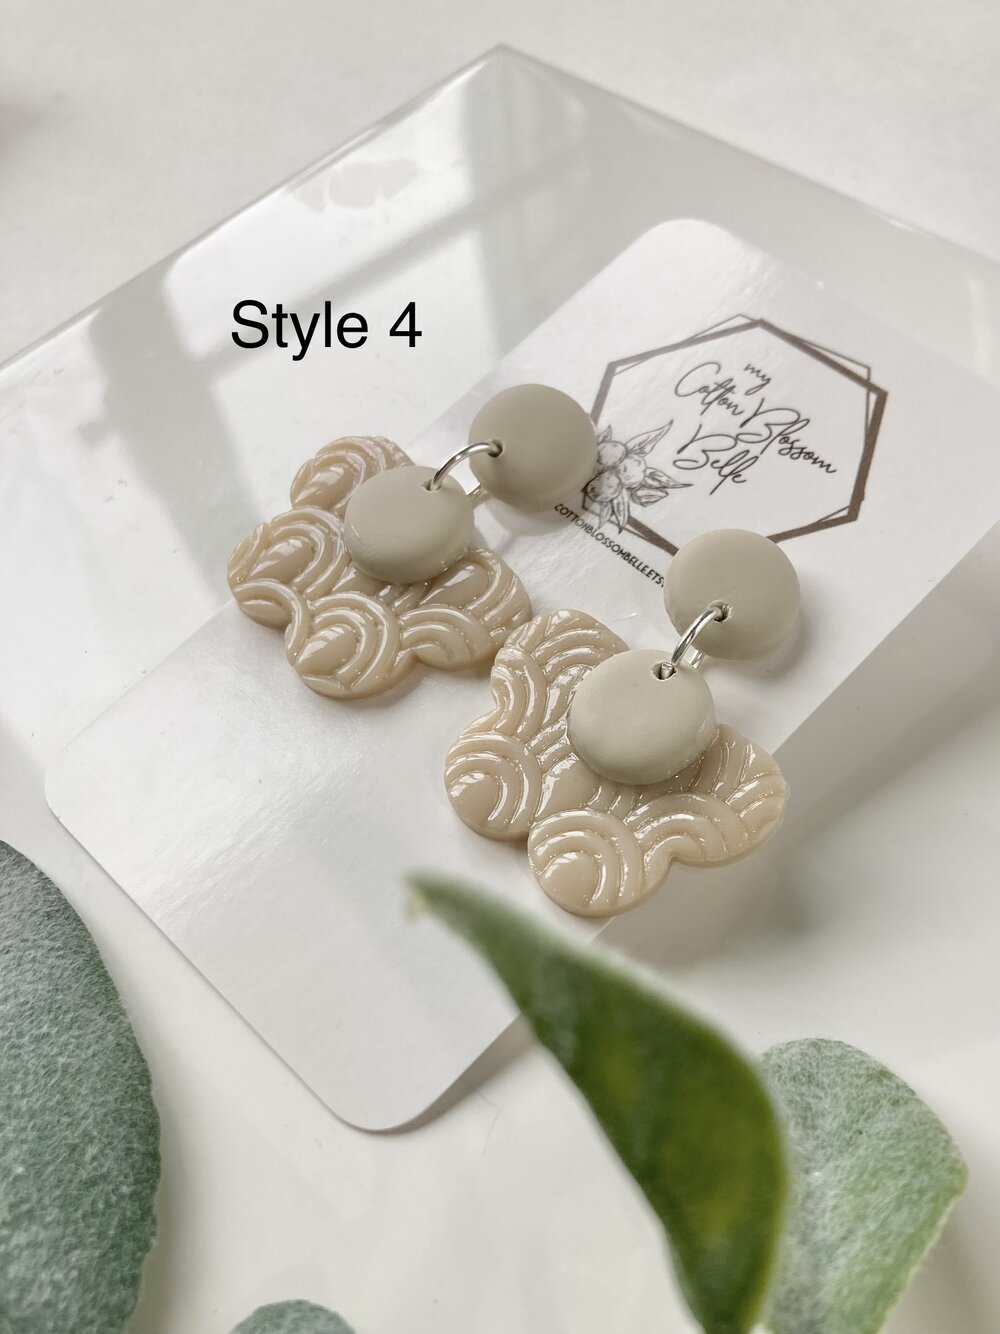 Store 2 — Unique and Trendy Handmade Clay Jewelry